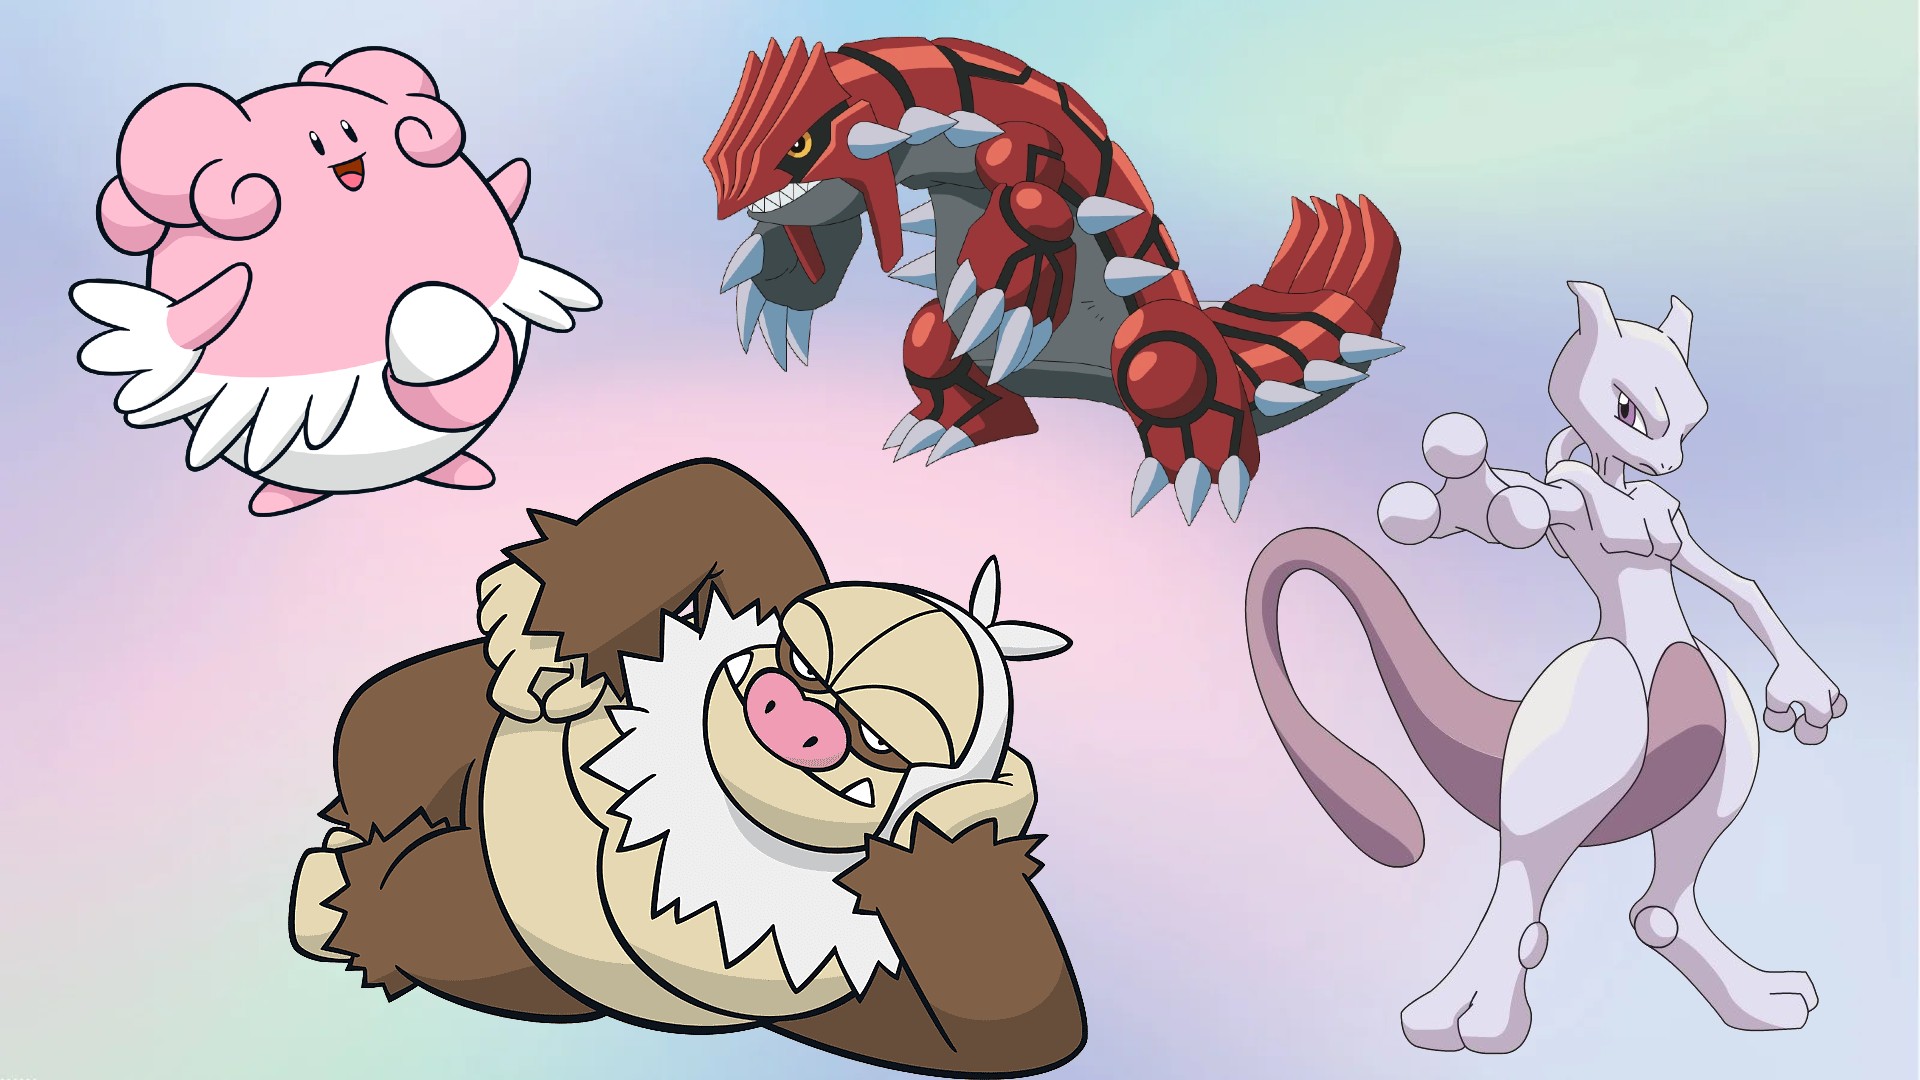 The top five most overpowered Legendary Pokemon of all time